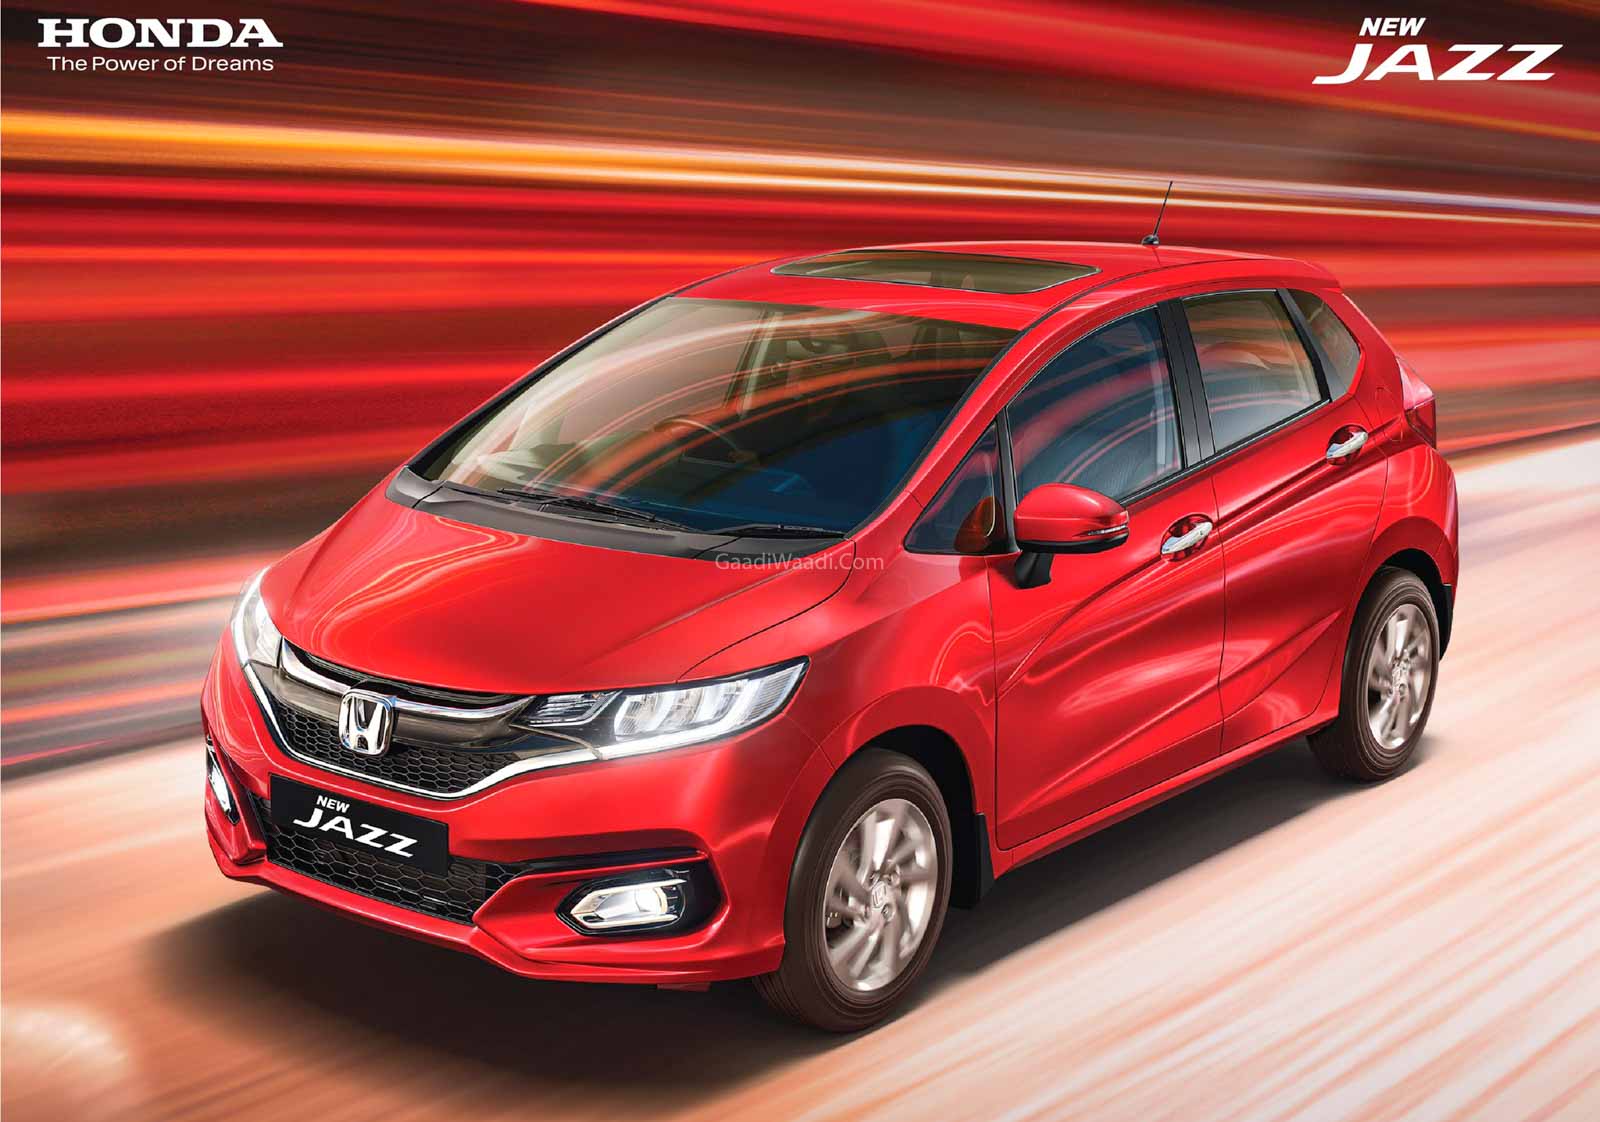 2020 Honda Jazz Facelift Unveiled With Electric Sunroof ...